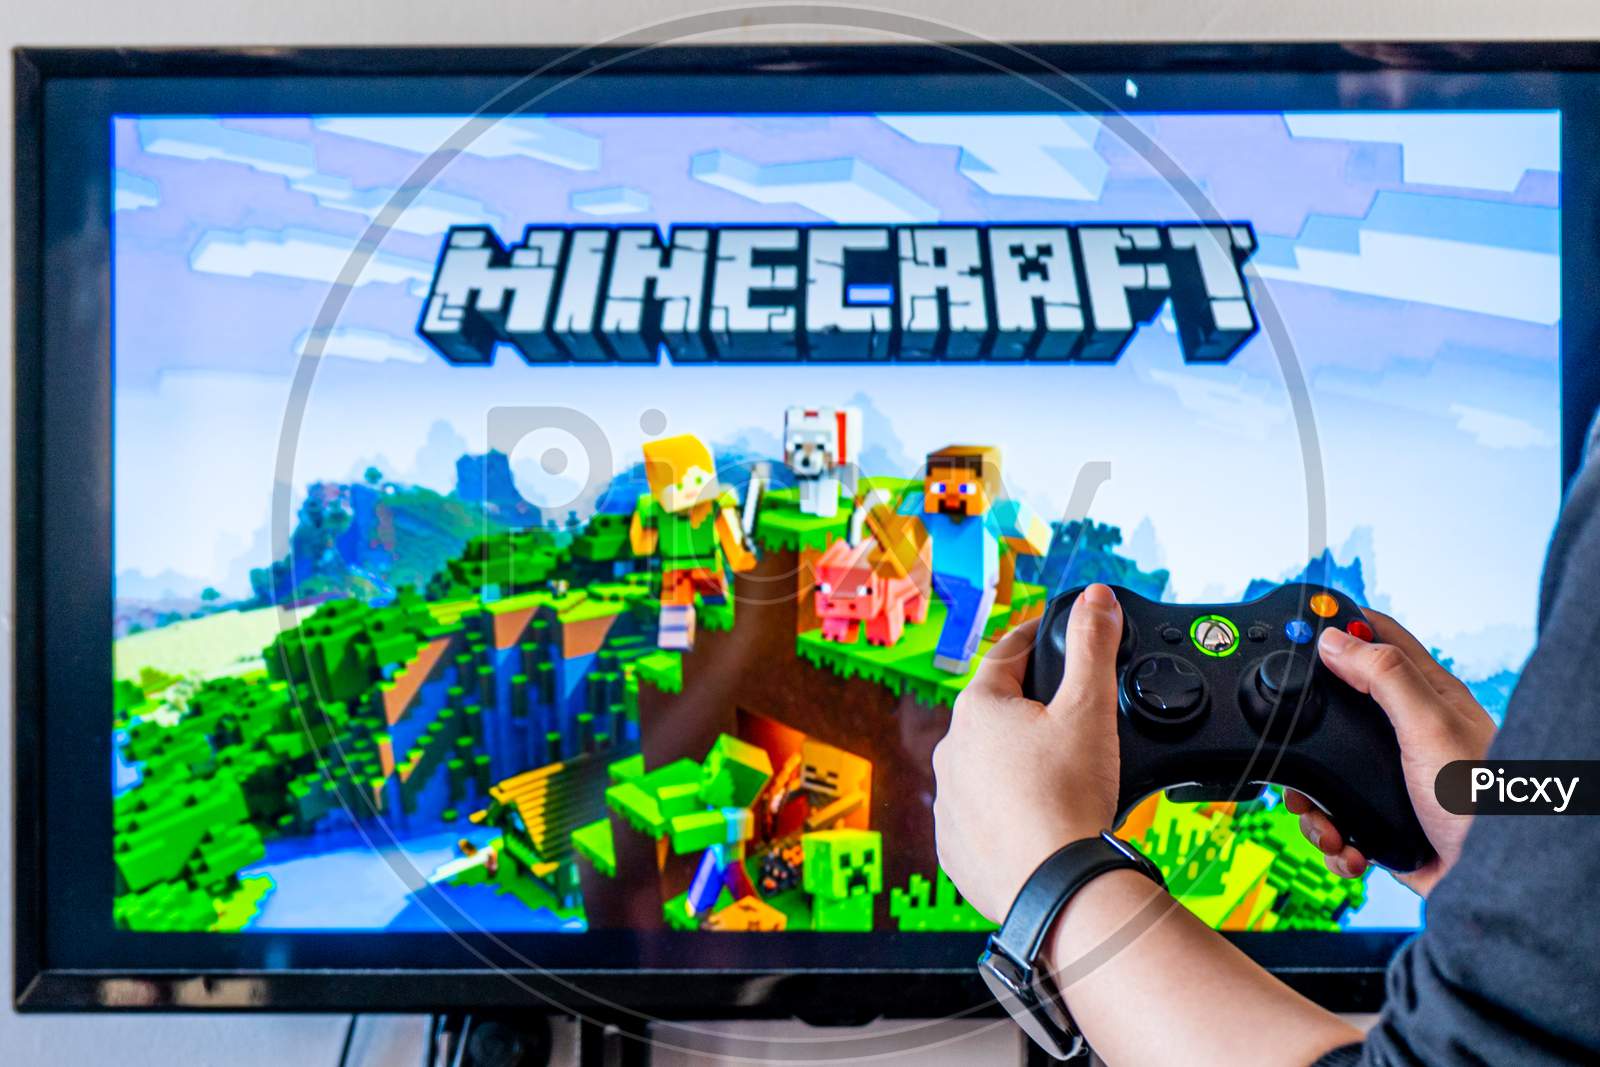 Woman Holding A Xbox Controller And Playing Popular Video Game Minecraft On A Television And Pc